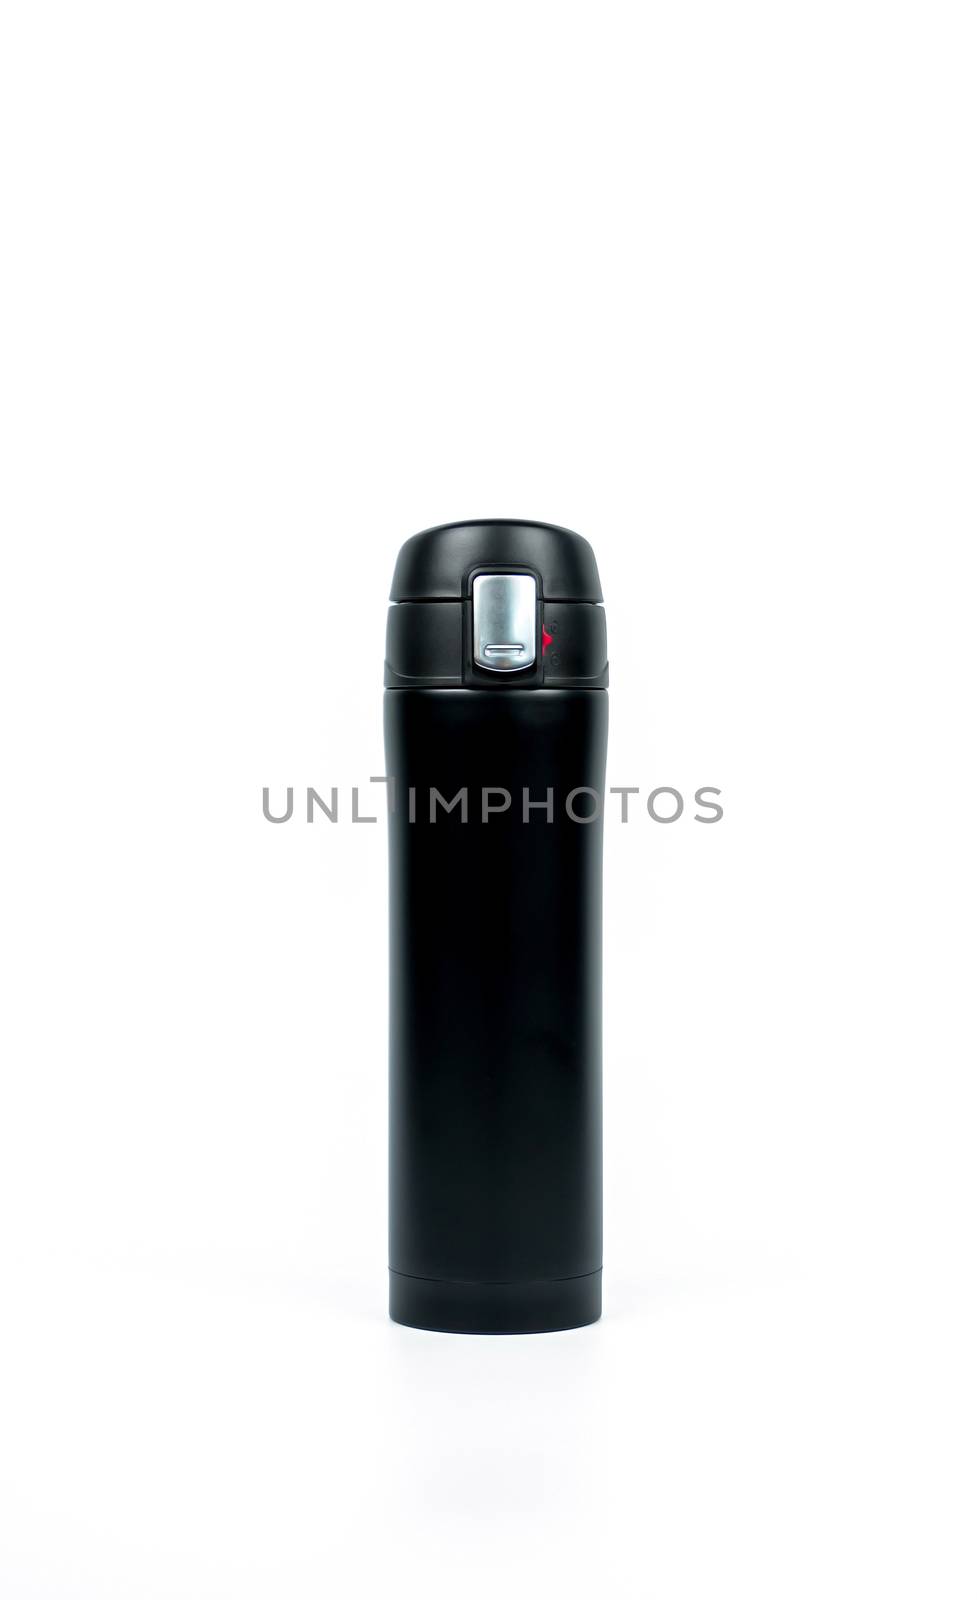 Black thermos bottle on white background with copy space